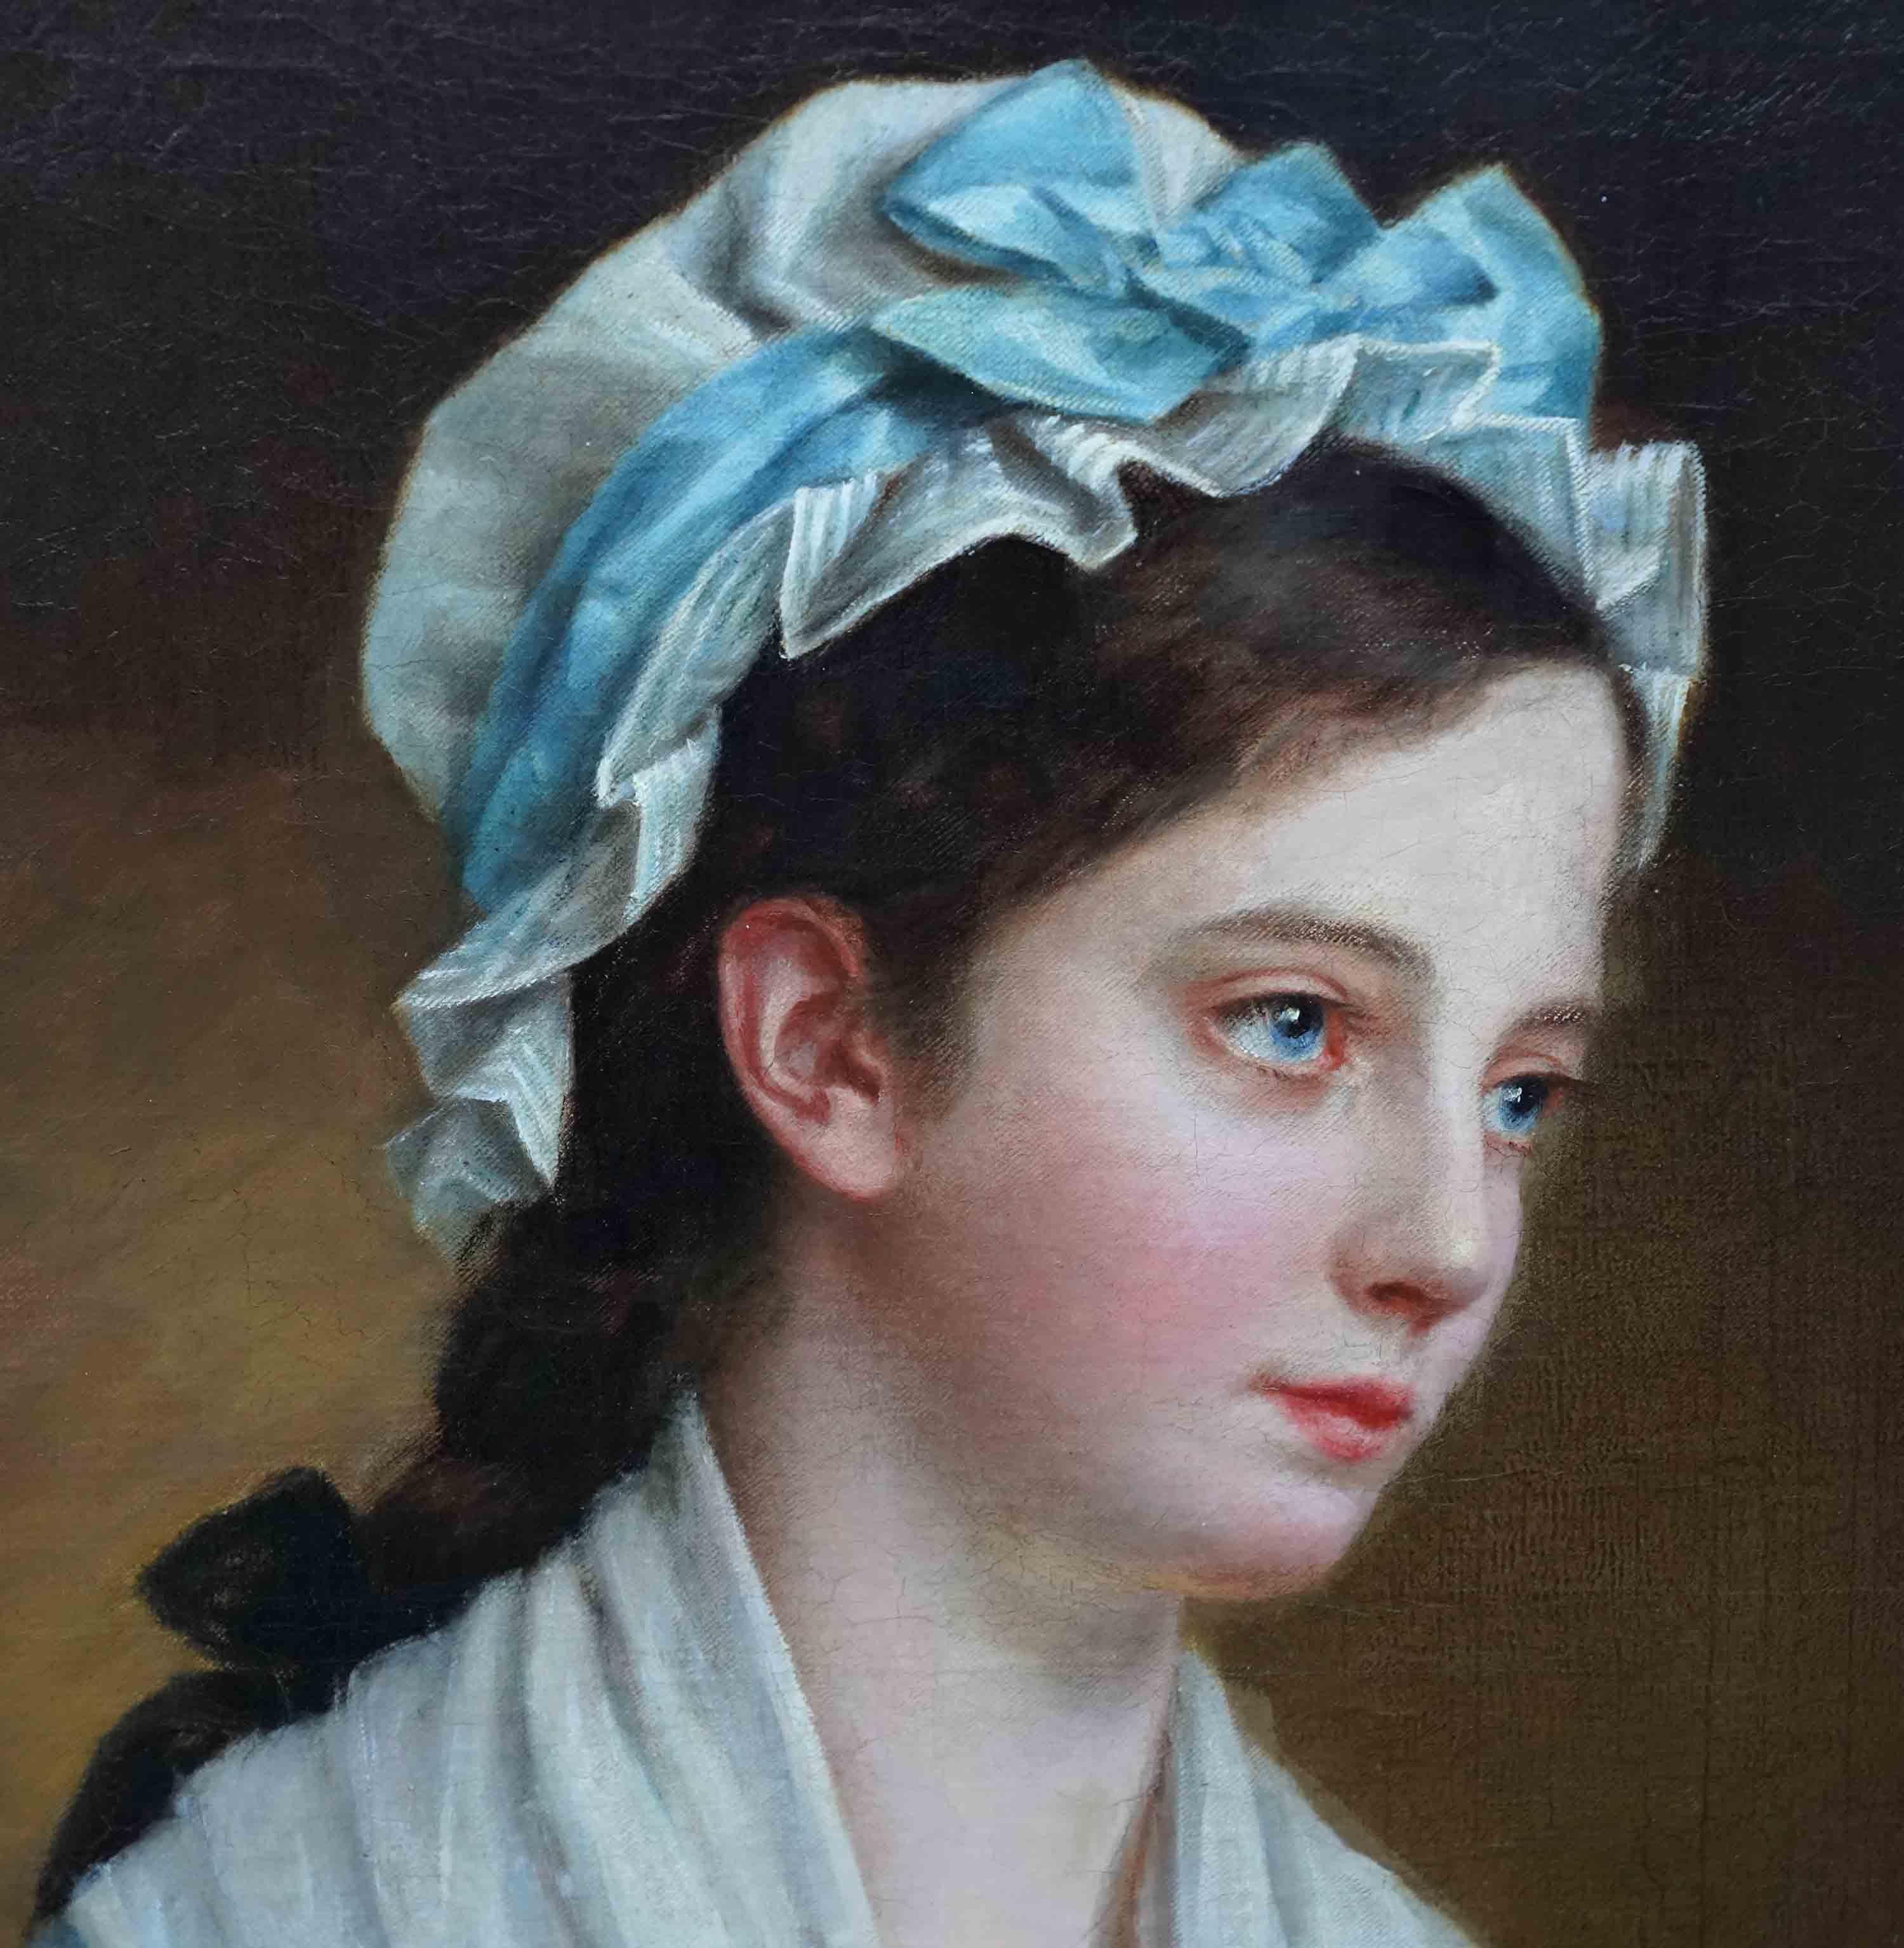 This charming 19th century portrait oil painting is attributed to the French School and painted by a female artoist. It has the composition and delicacy of French academic painters such as Ingres and Jerome. It was painted in 1879 in Paris. It is a